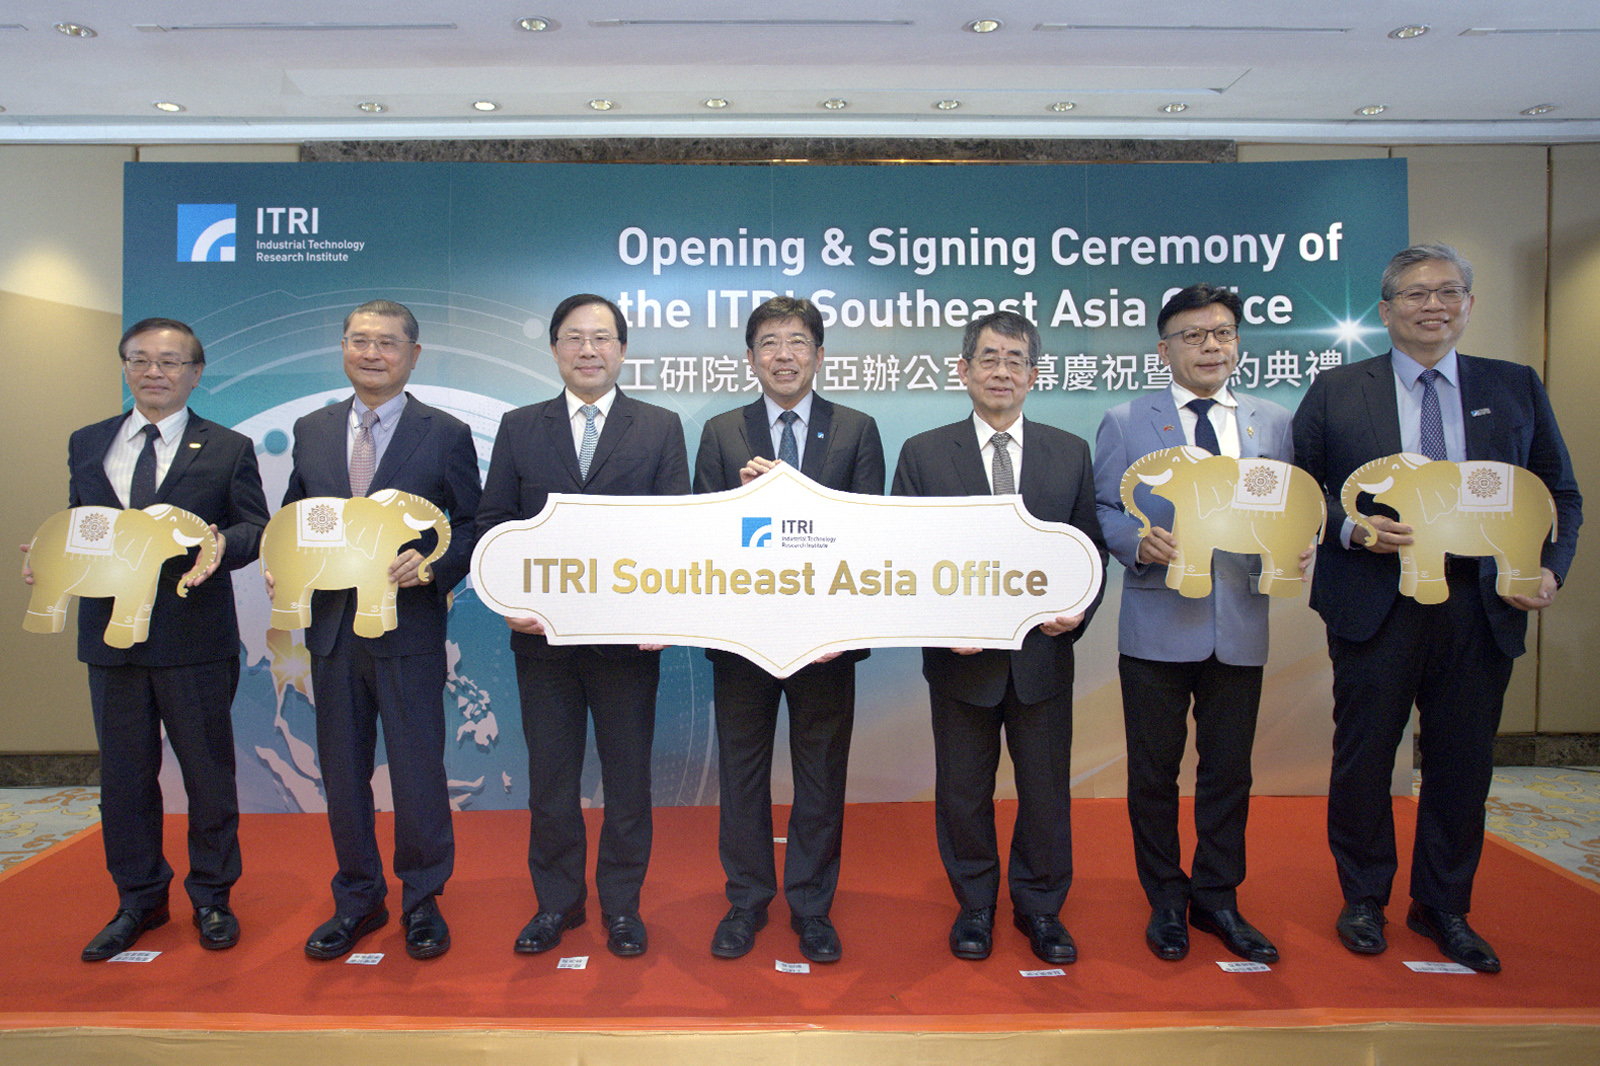 The inauguration of the ITRI Southeast Asia Office marks a significant step in strengthening industry ties between Taiwan and Thailand.